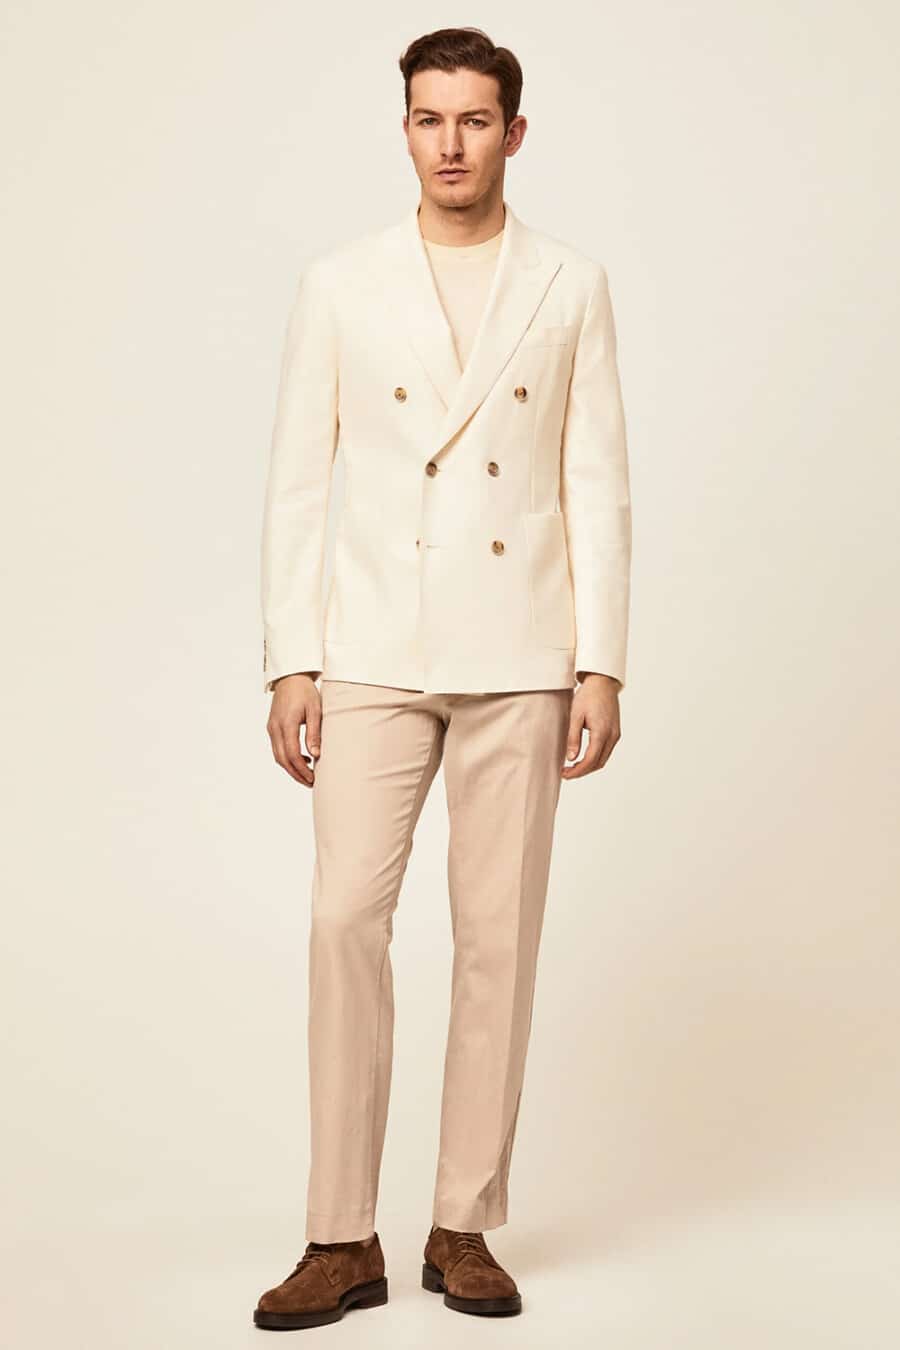 Men's khaki pants, cream T-shirt, cream double-breasted blazer and brown suede Derby shoes outfit